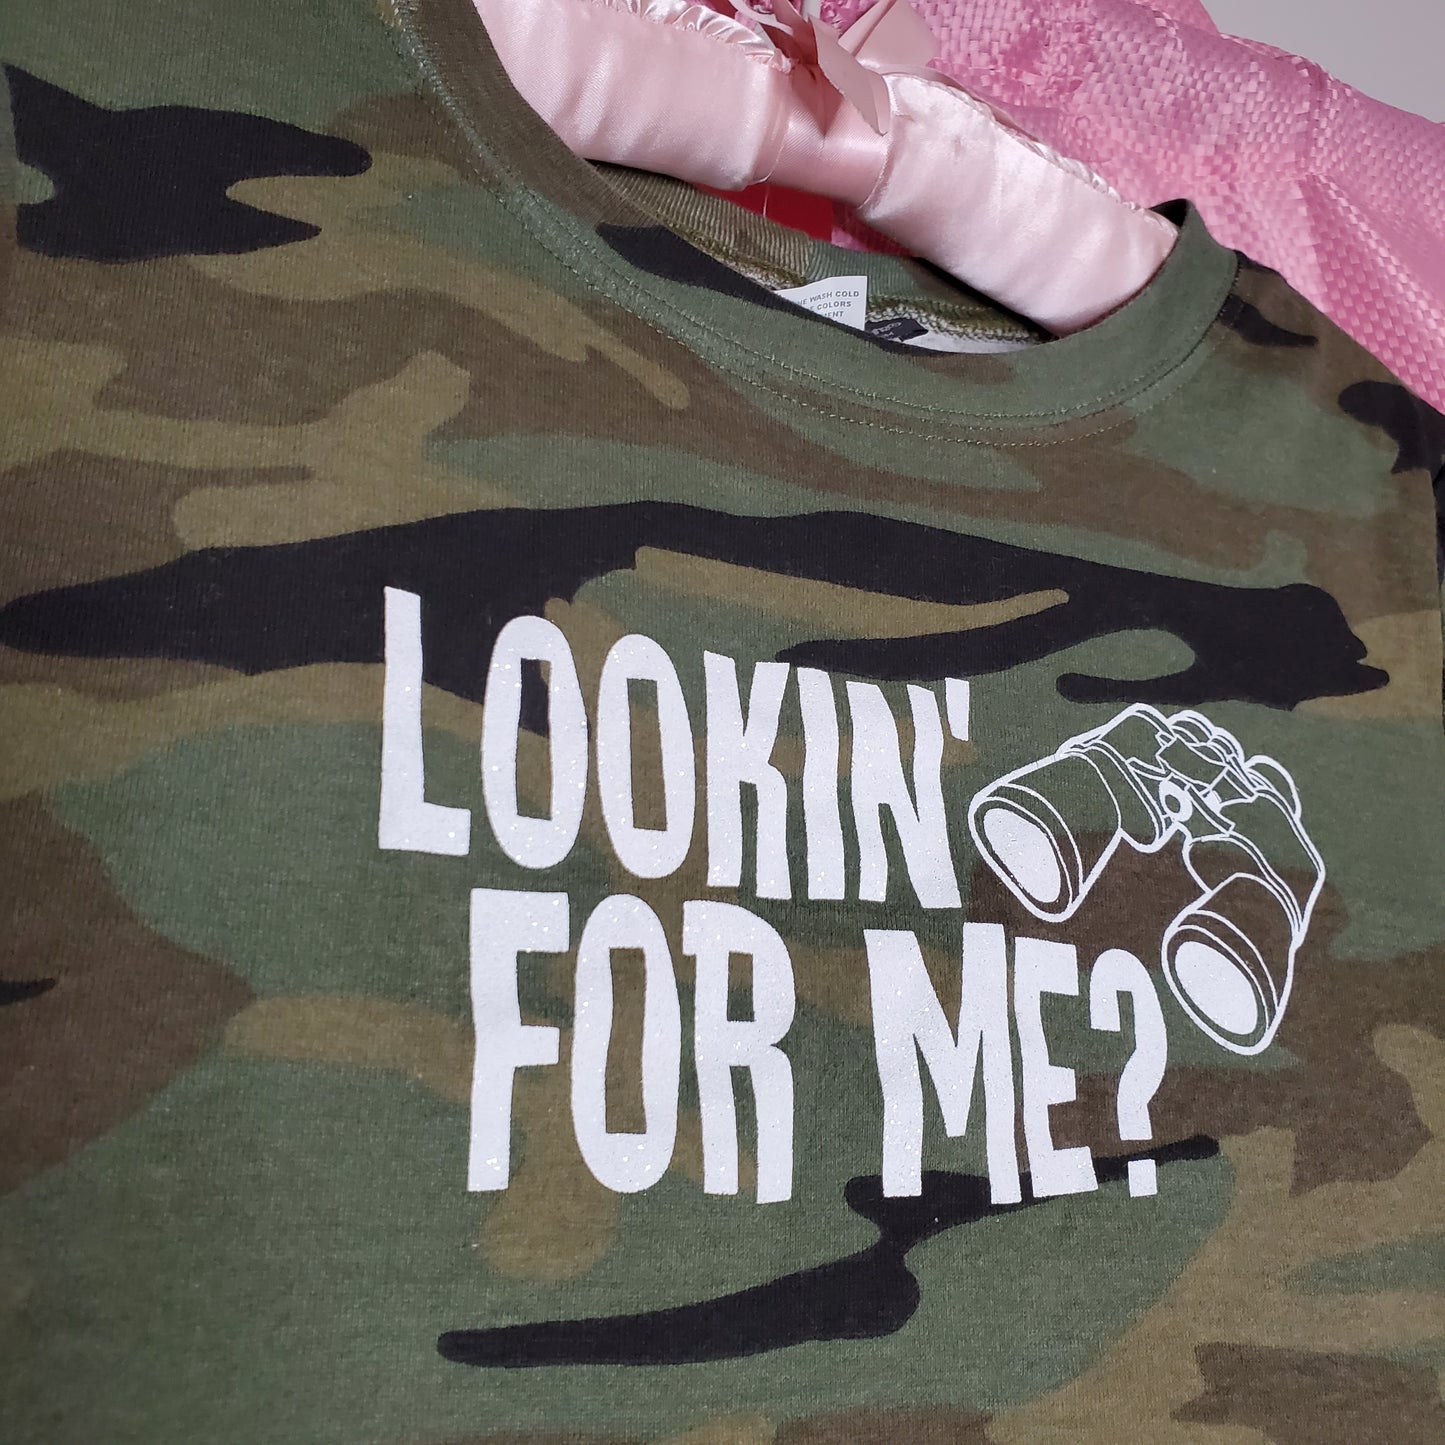 Lookin for me? Y2k graphic tee